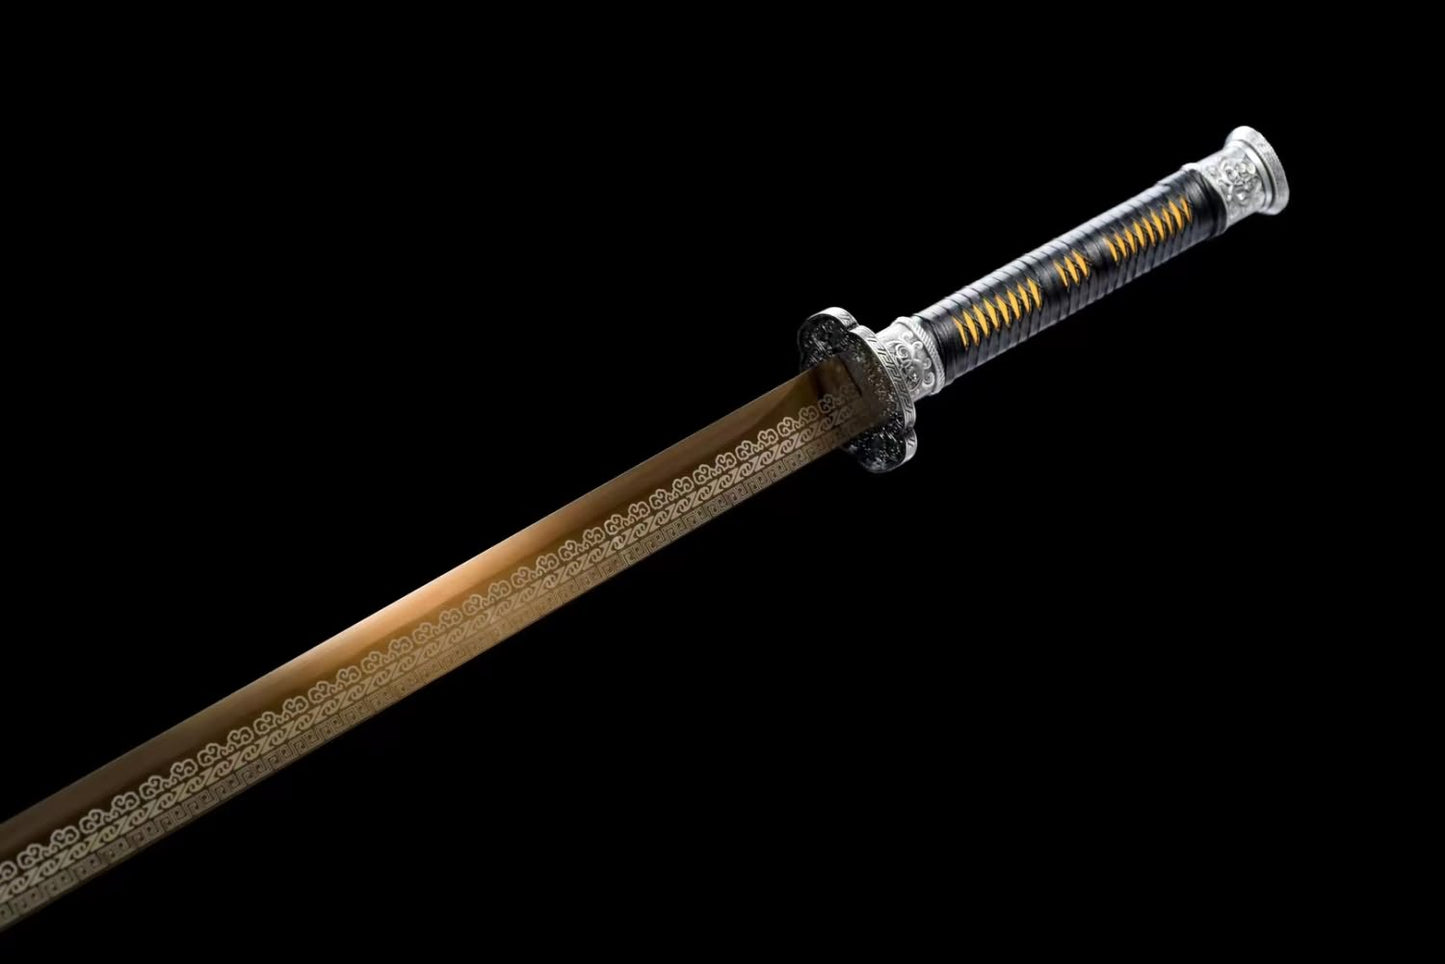 Tang Sword - Premium High Carbon Steel Blade - Ideal for Martial Arts - Golden Etching